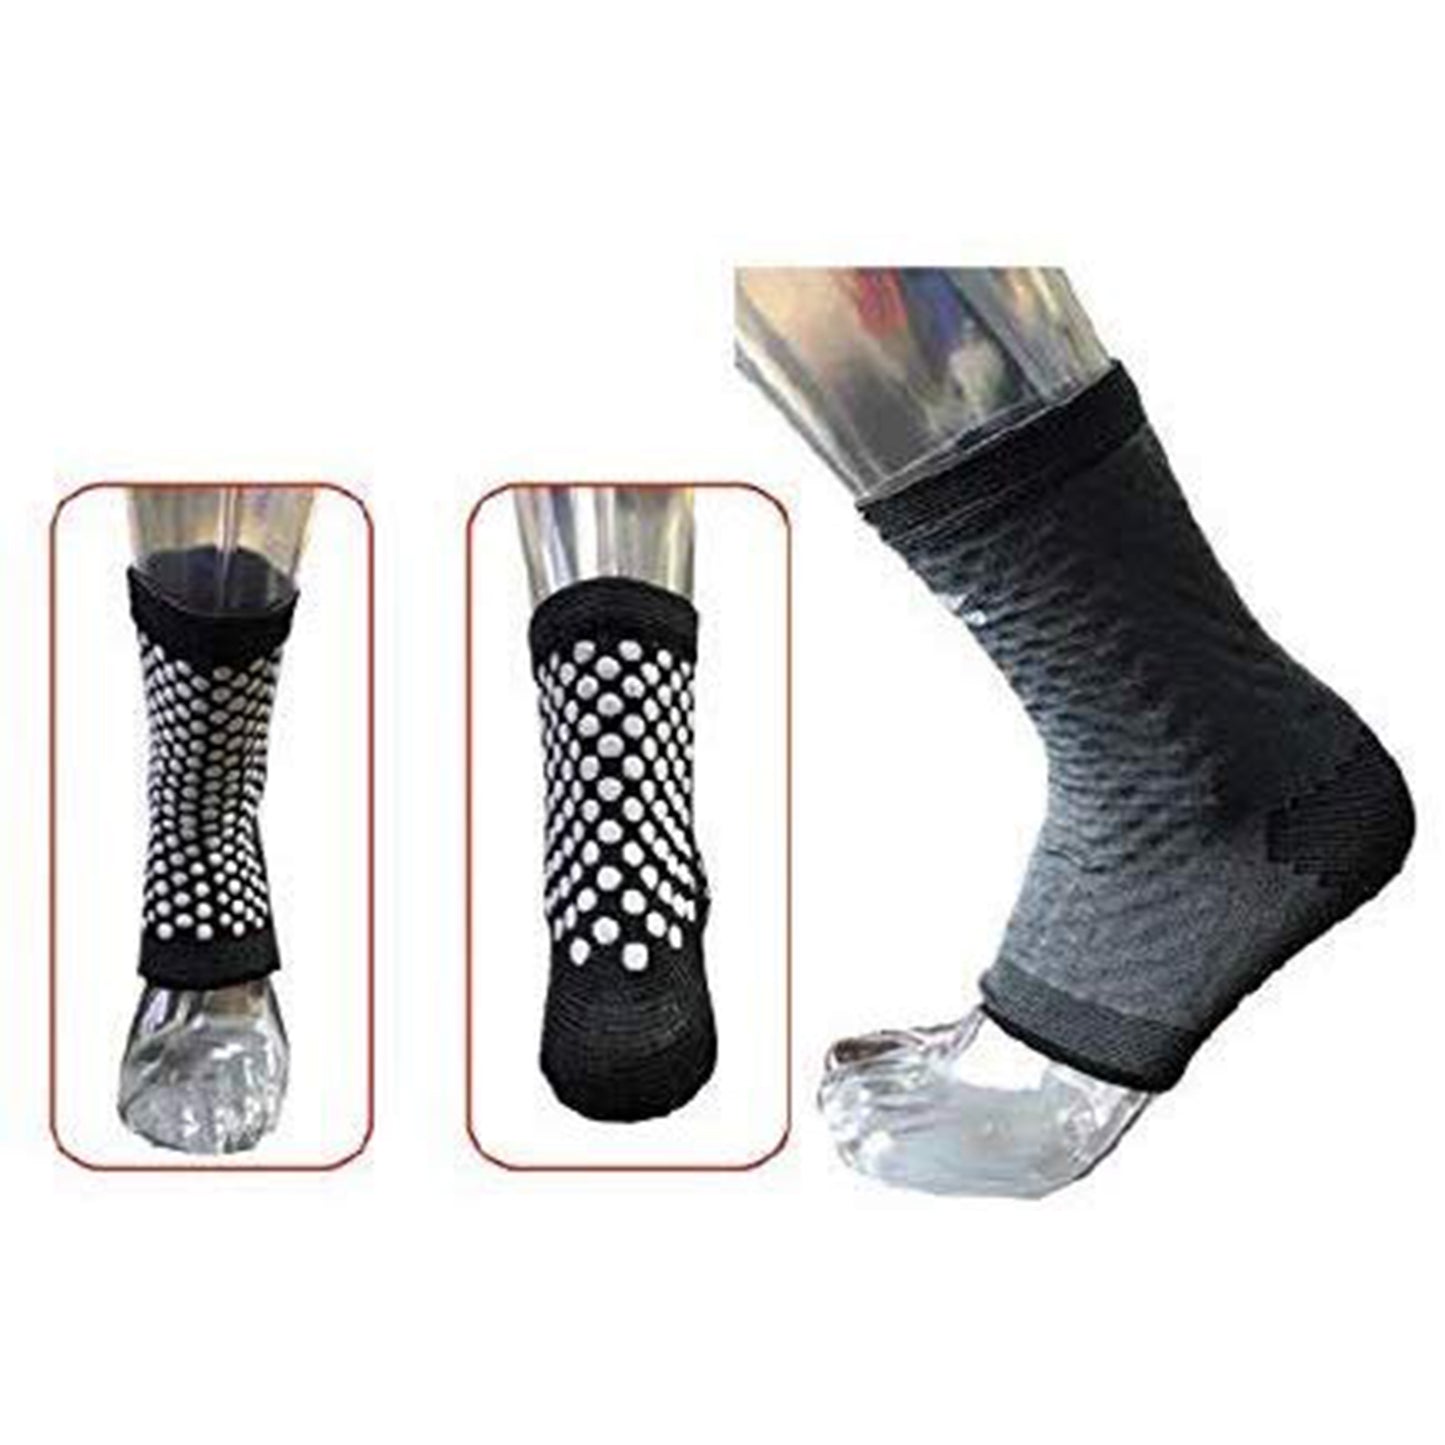 Li-Ning Unisex Ankle Support Suitable for Running, Pain Relief, Gym - Pack of 1 - Grey - Best Price online Prokicksports.com